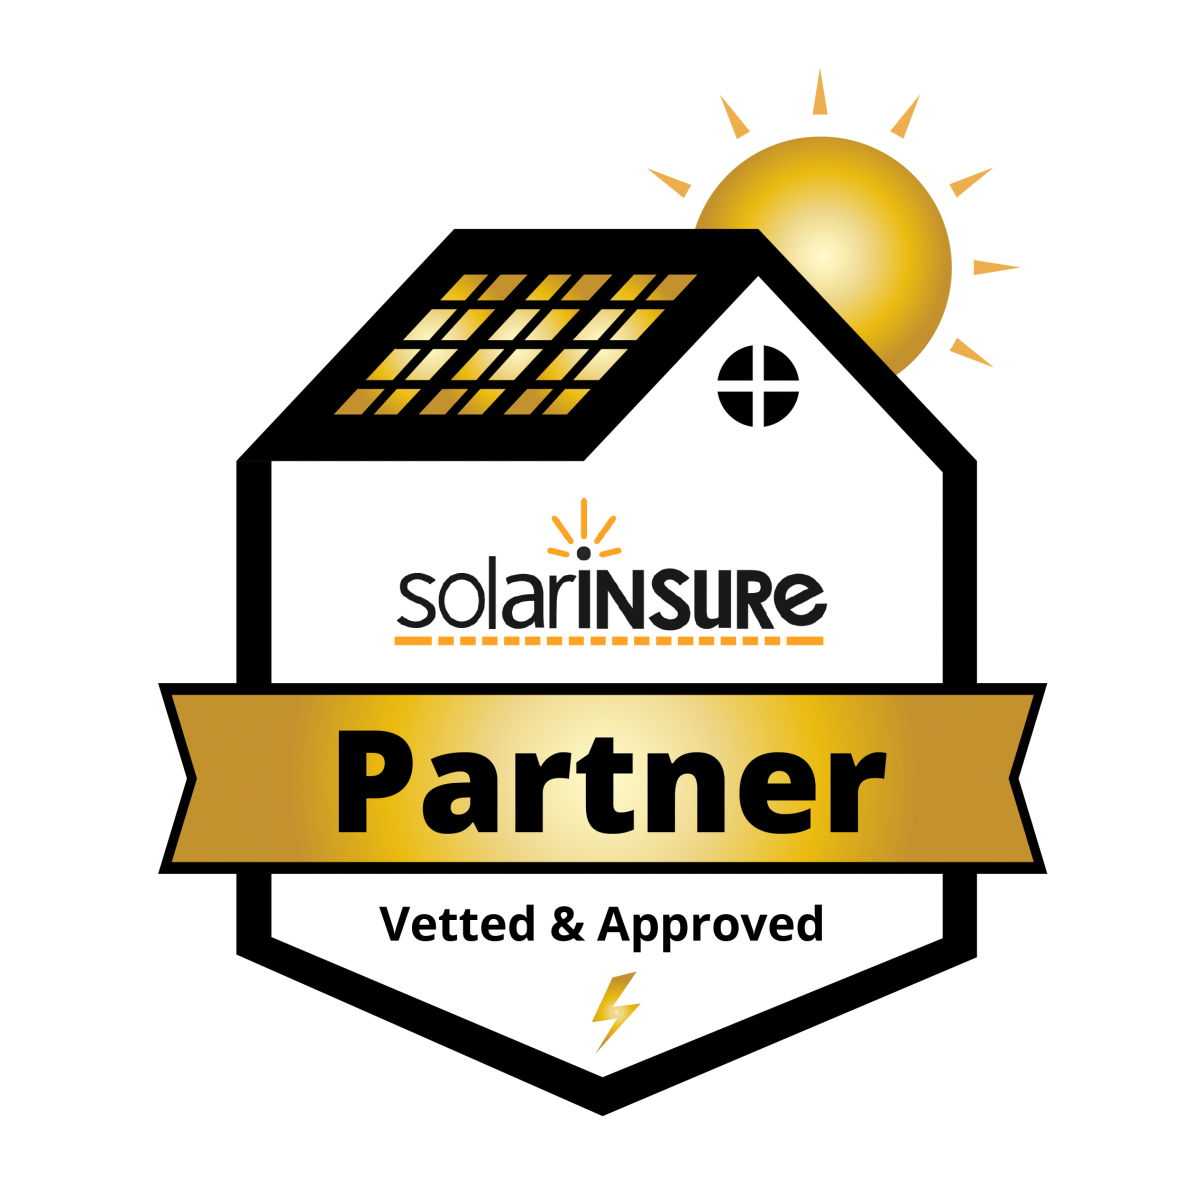 SolarINSure Partner Vetted and Approved Badge